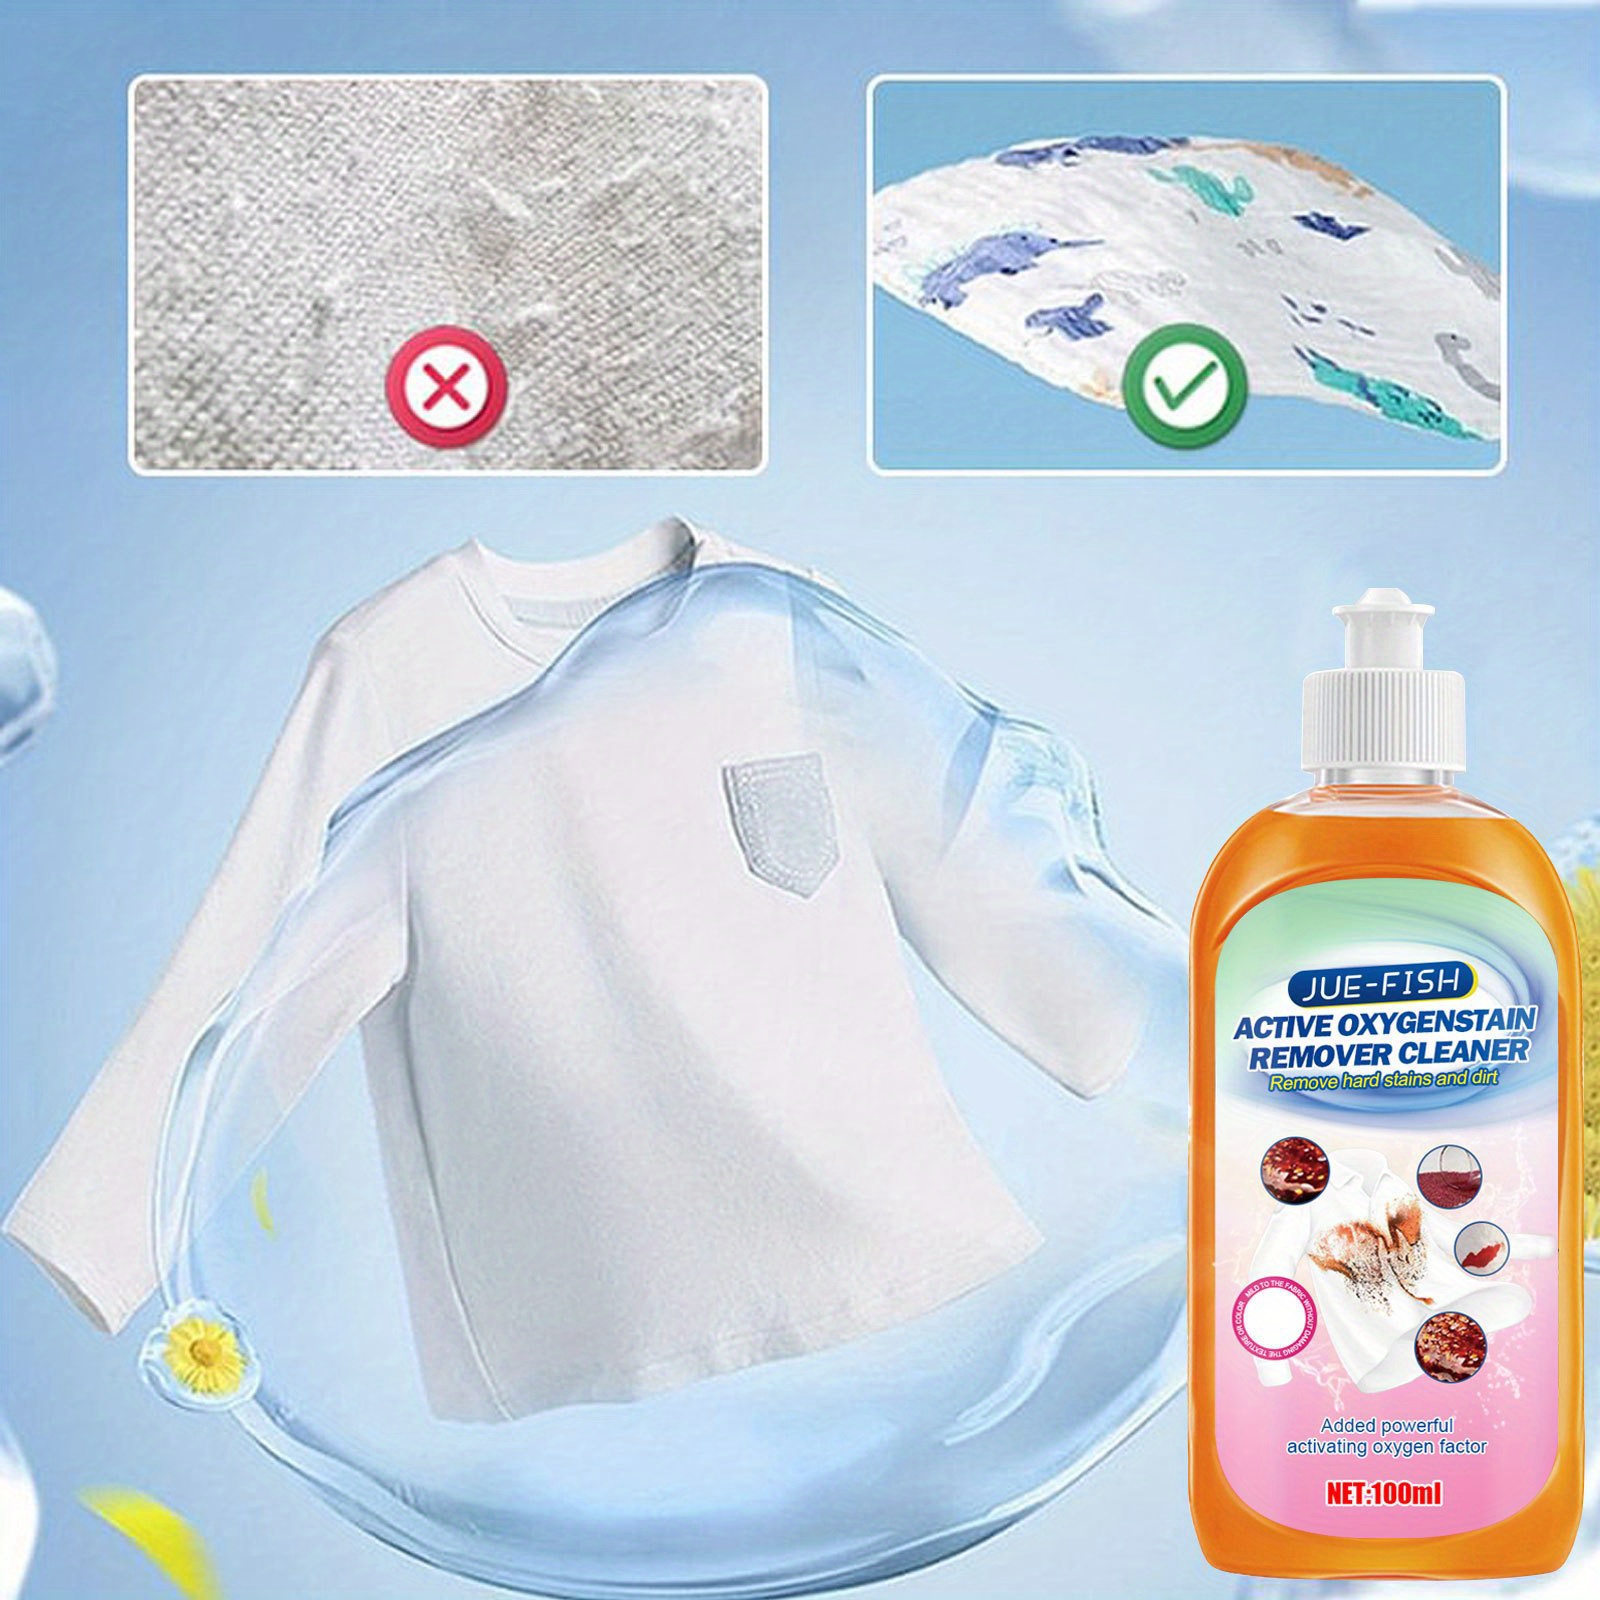 Sofa Cleaning Solution Rich Foam Dry Cleaning Spray, Leather Canvas Velvet  Stain Removal Fabric Cleaner Home Cleaning for shops